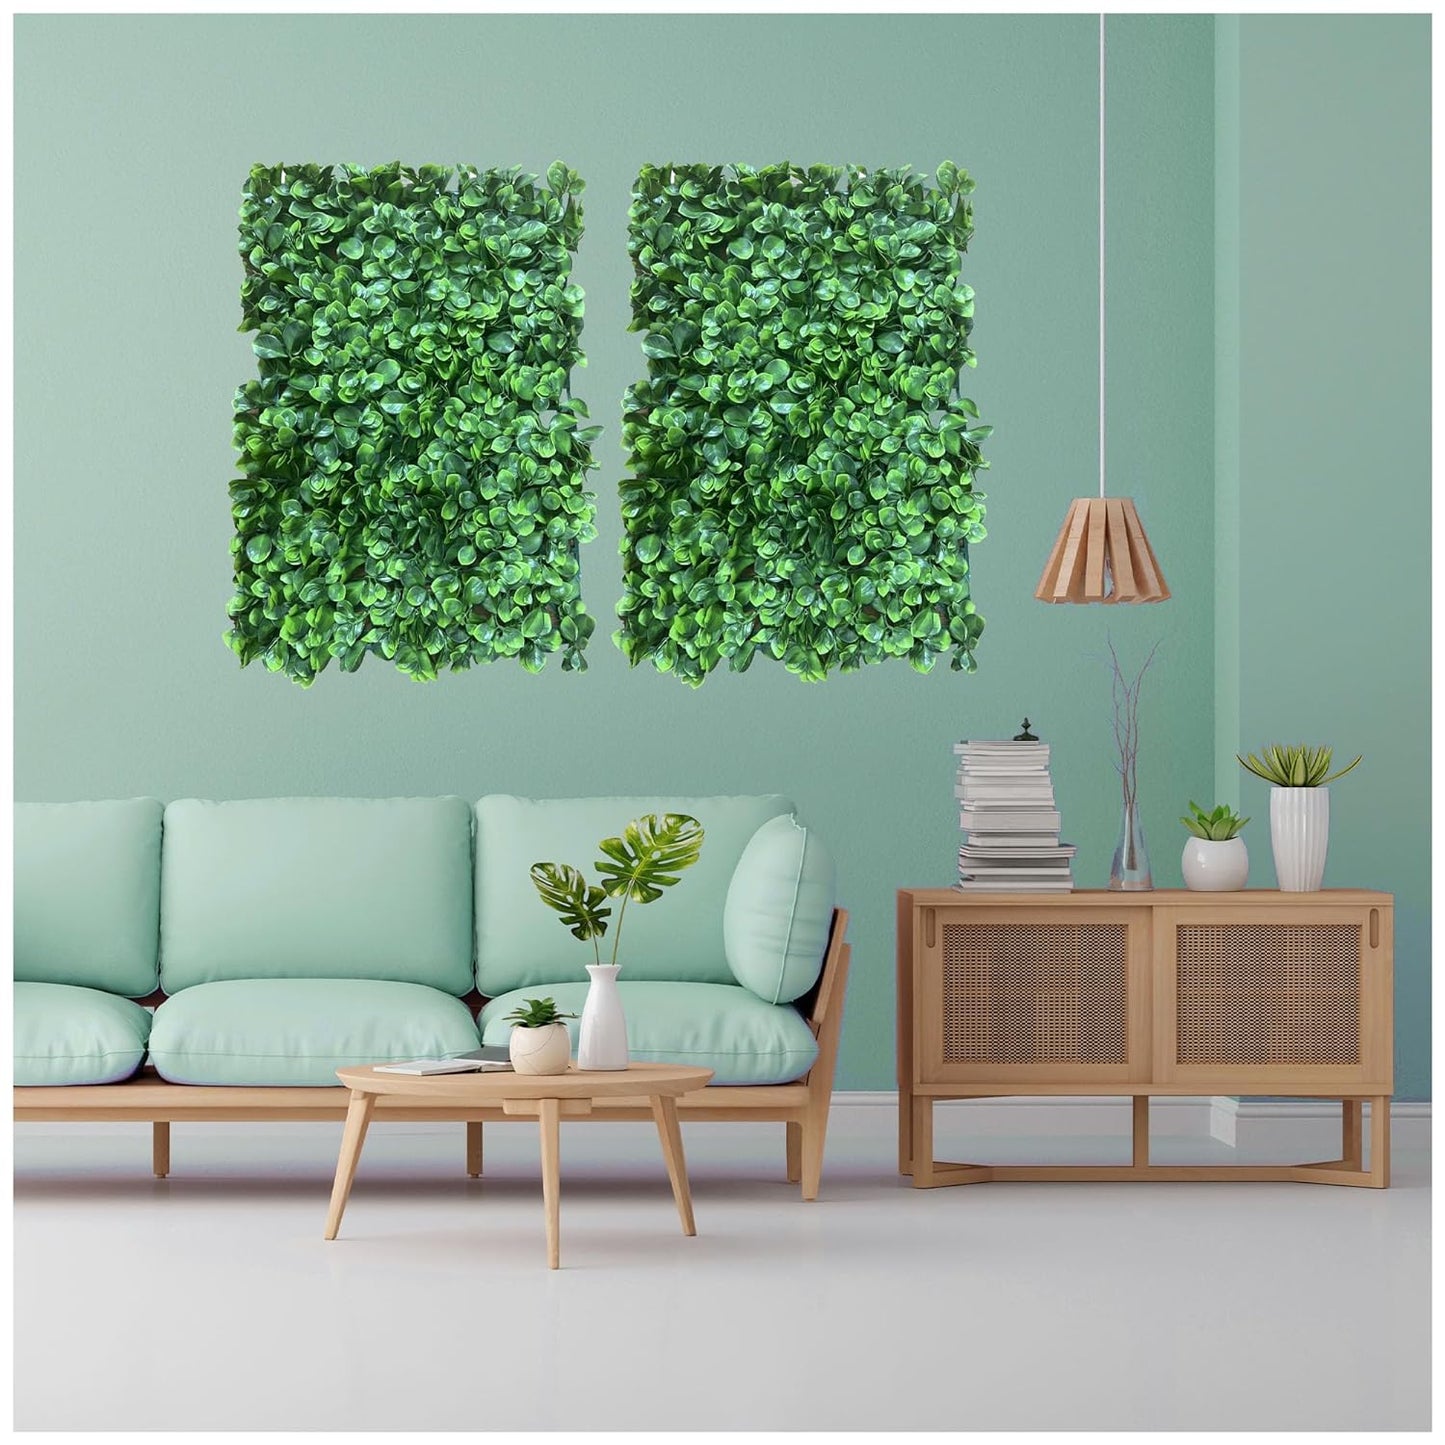 Artificial Vertical Wall Mat for Indoor & Outdoor Walls (Size 40 cm x 60 cm), Leave Green